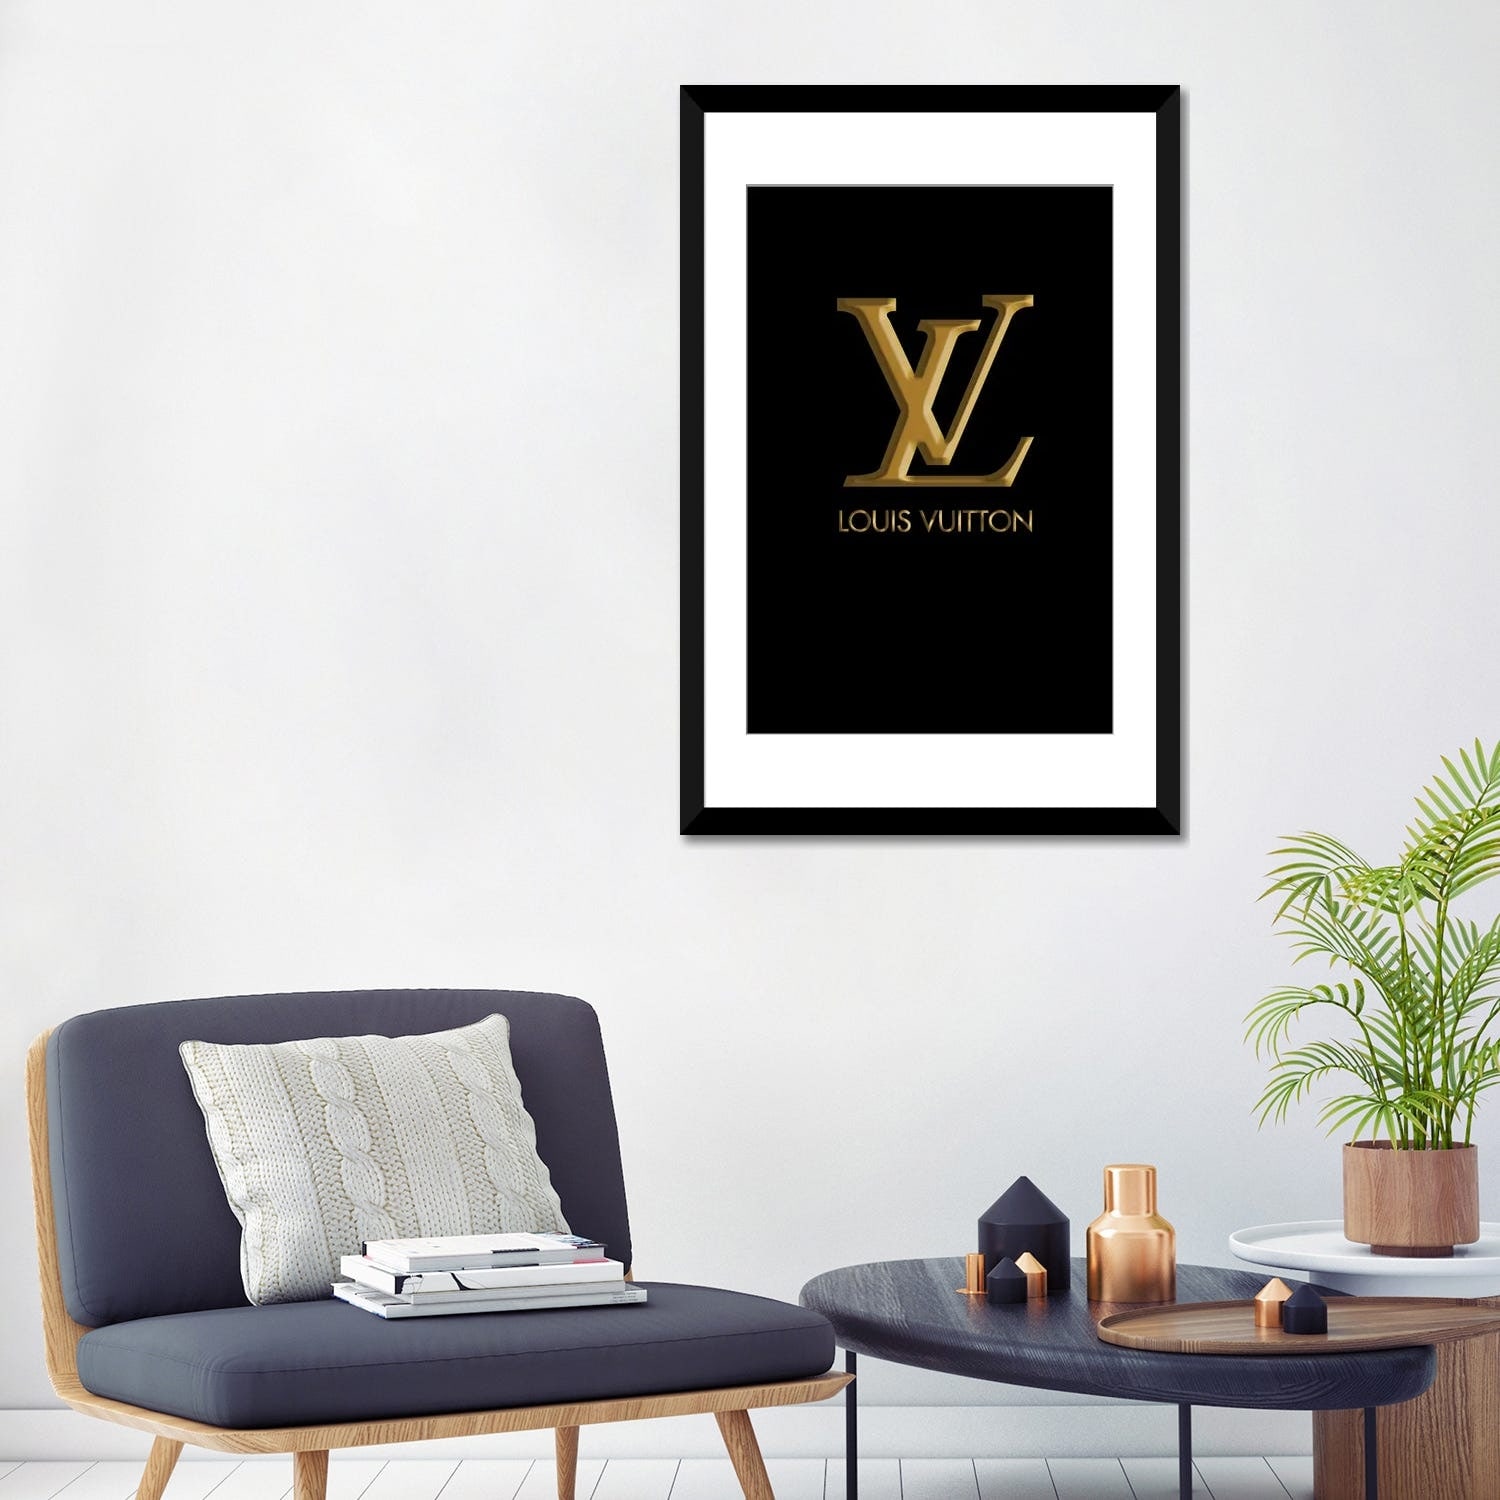 Framed Poster Prints - Louis Vuitton by Paul Rommer ( Fashion > Fashion Brands > Louis Vuitton art) - 32x24x1